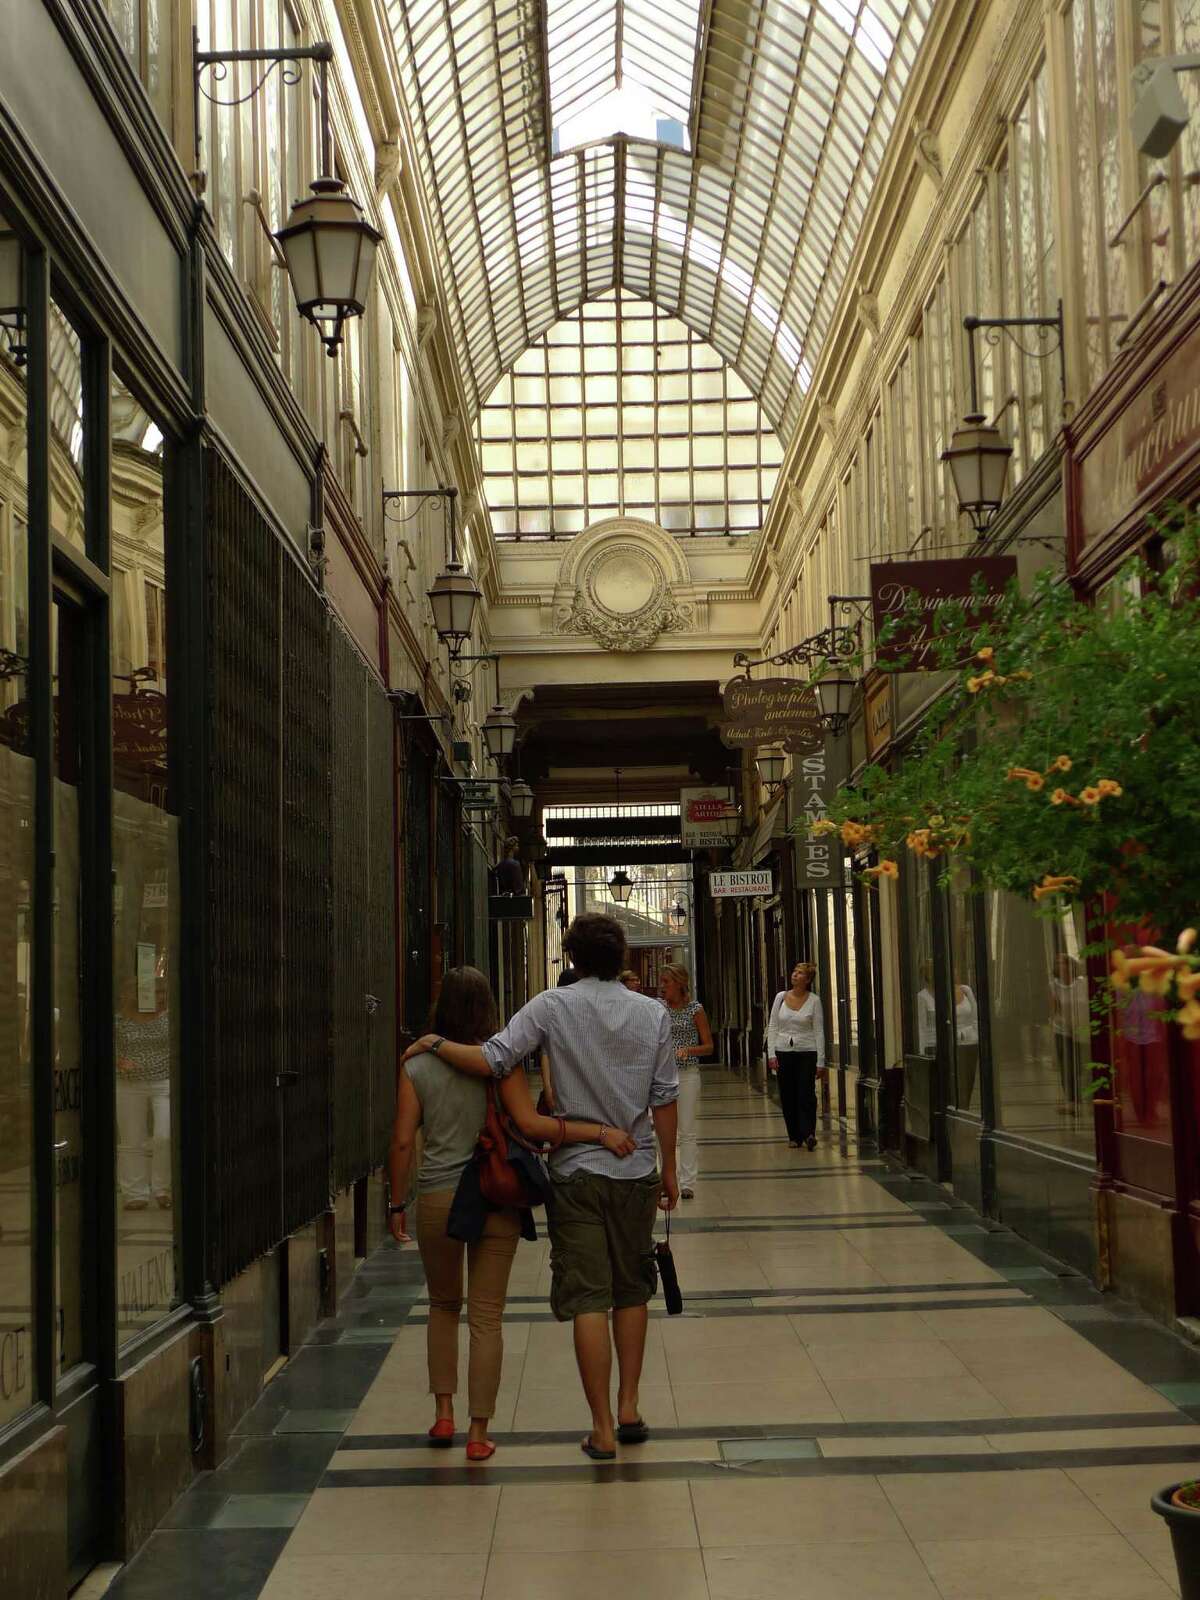 Locals stroll through Passage du Grand Cerf, one of the remaining covered passages in Paris.